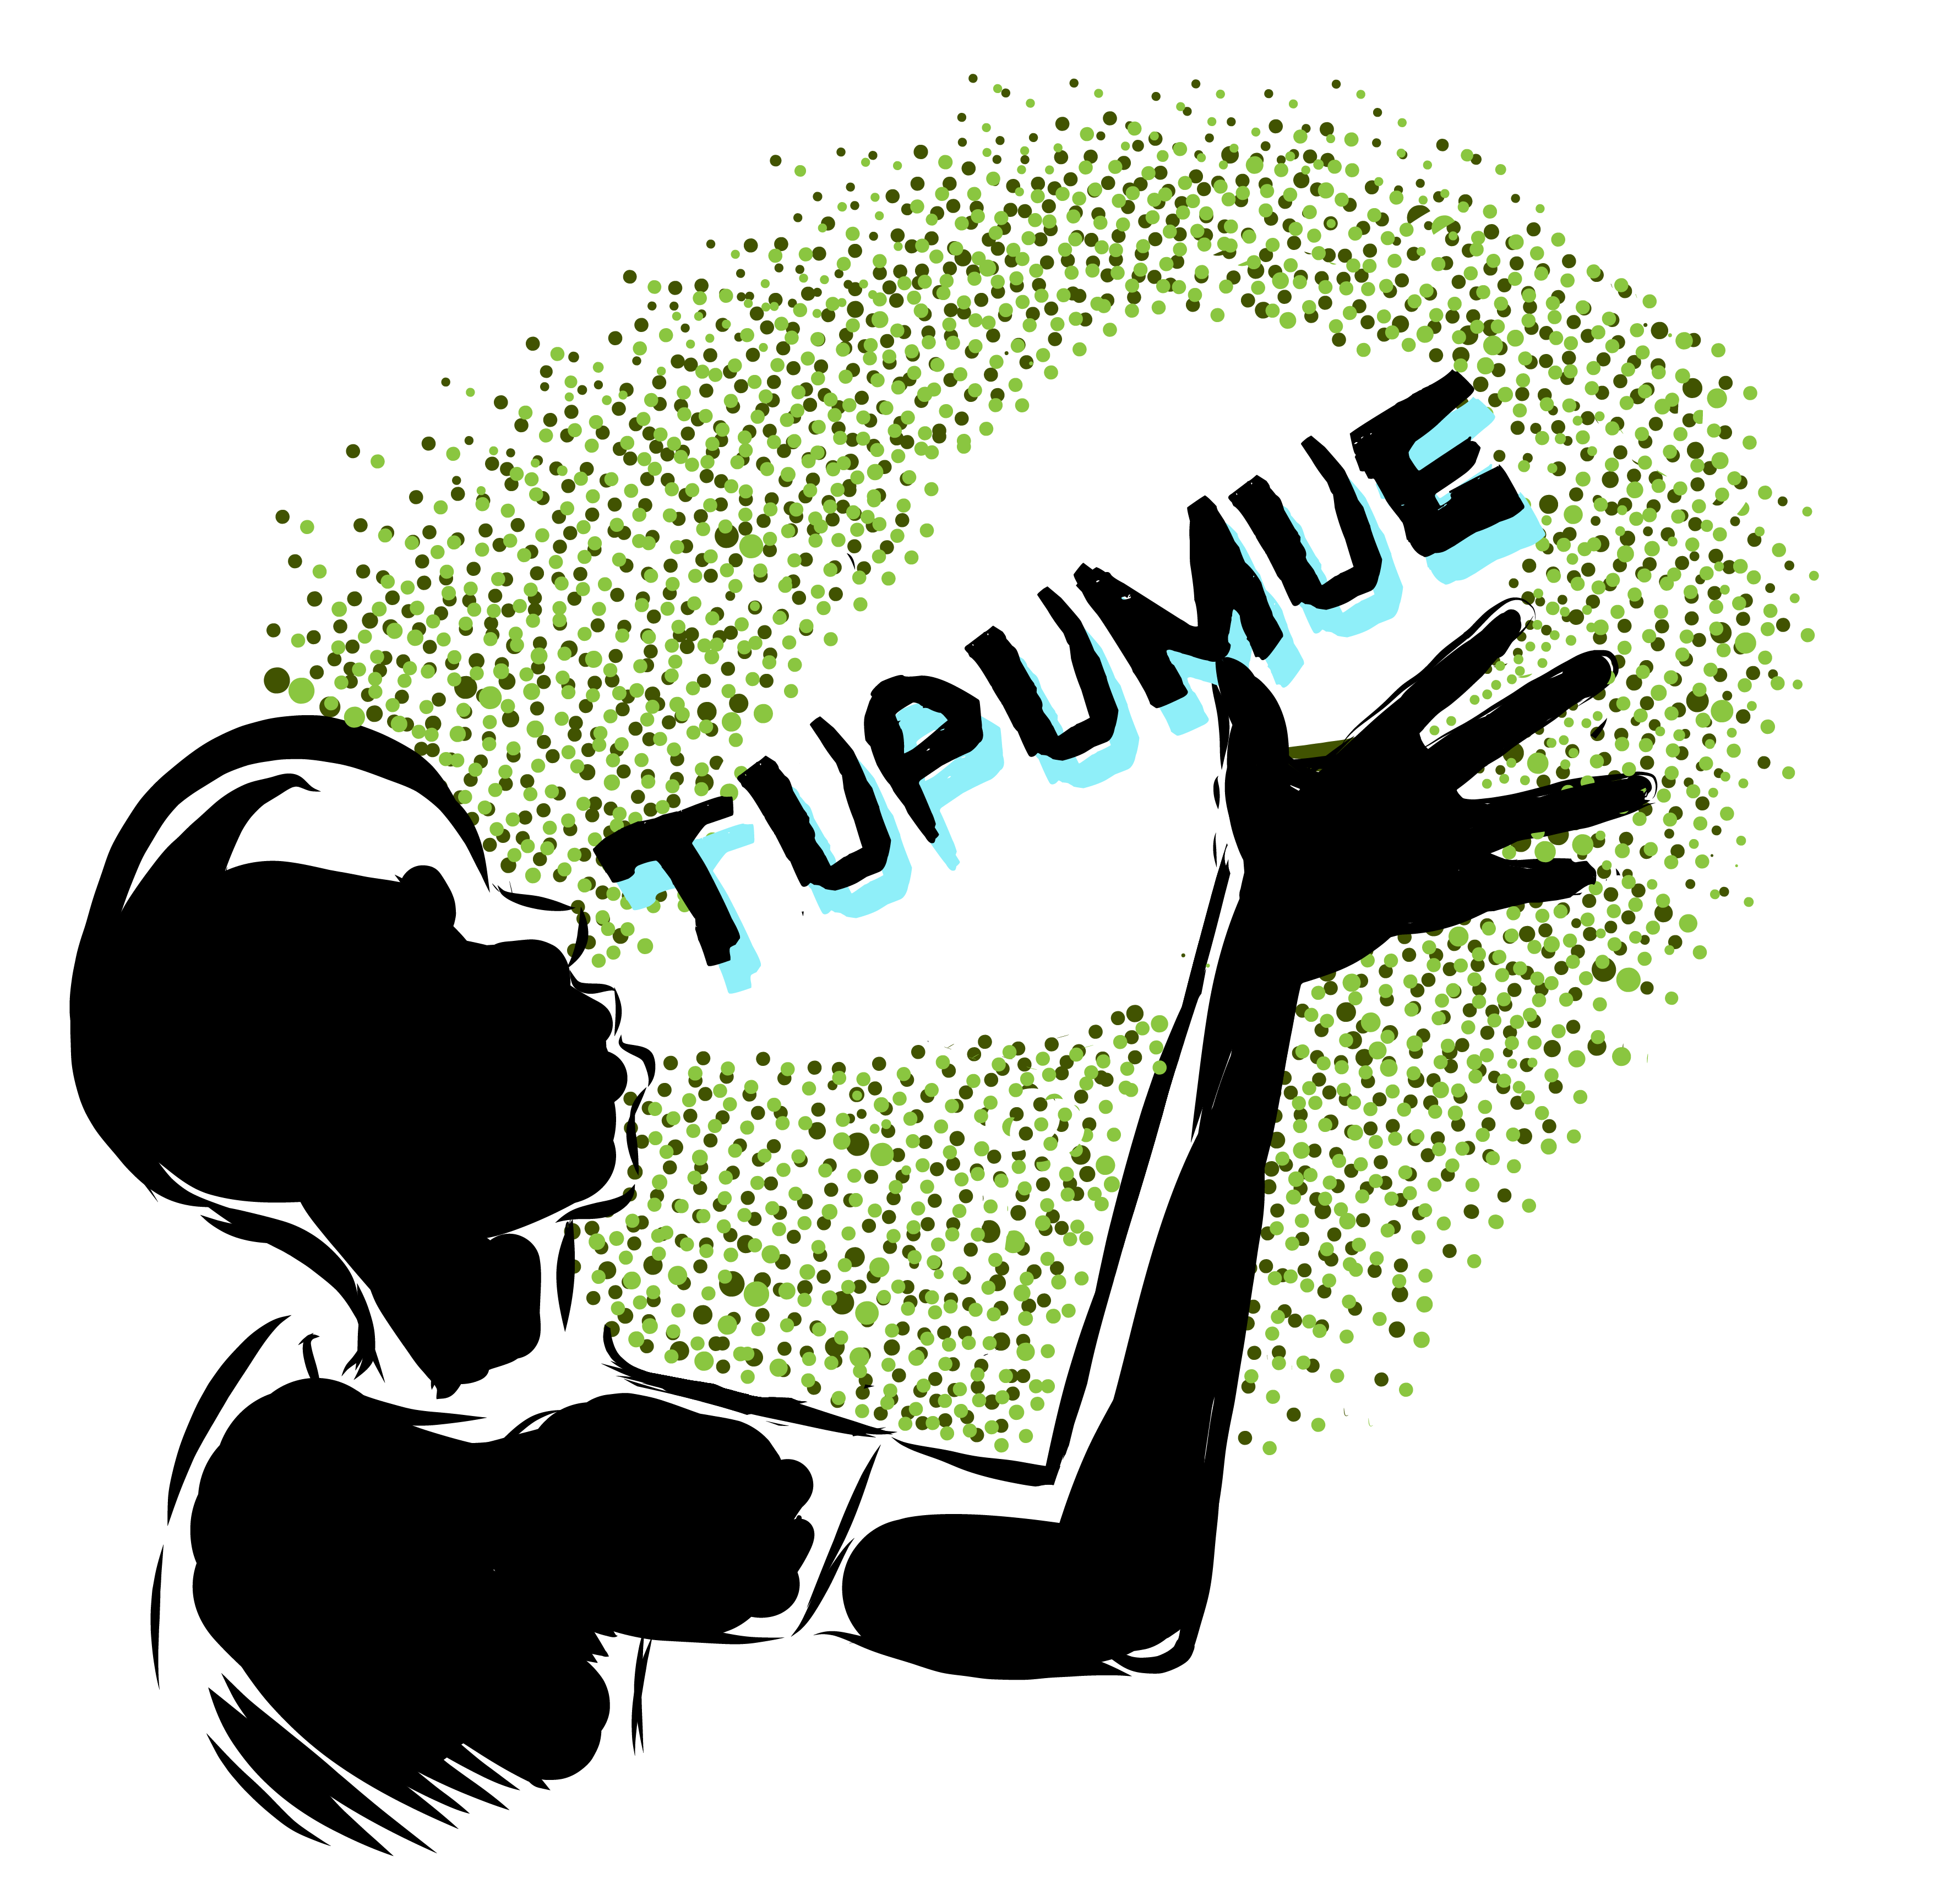 Drawing of a silhouette of a person with the word Tupumue coming out of their mouth.